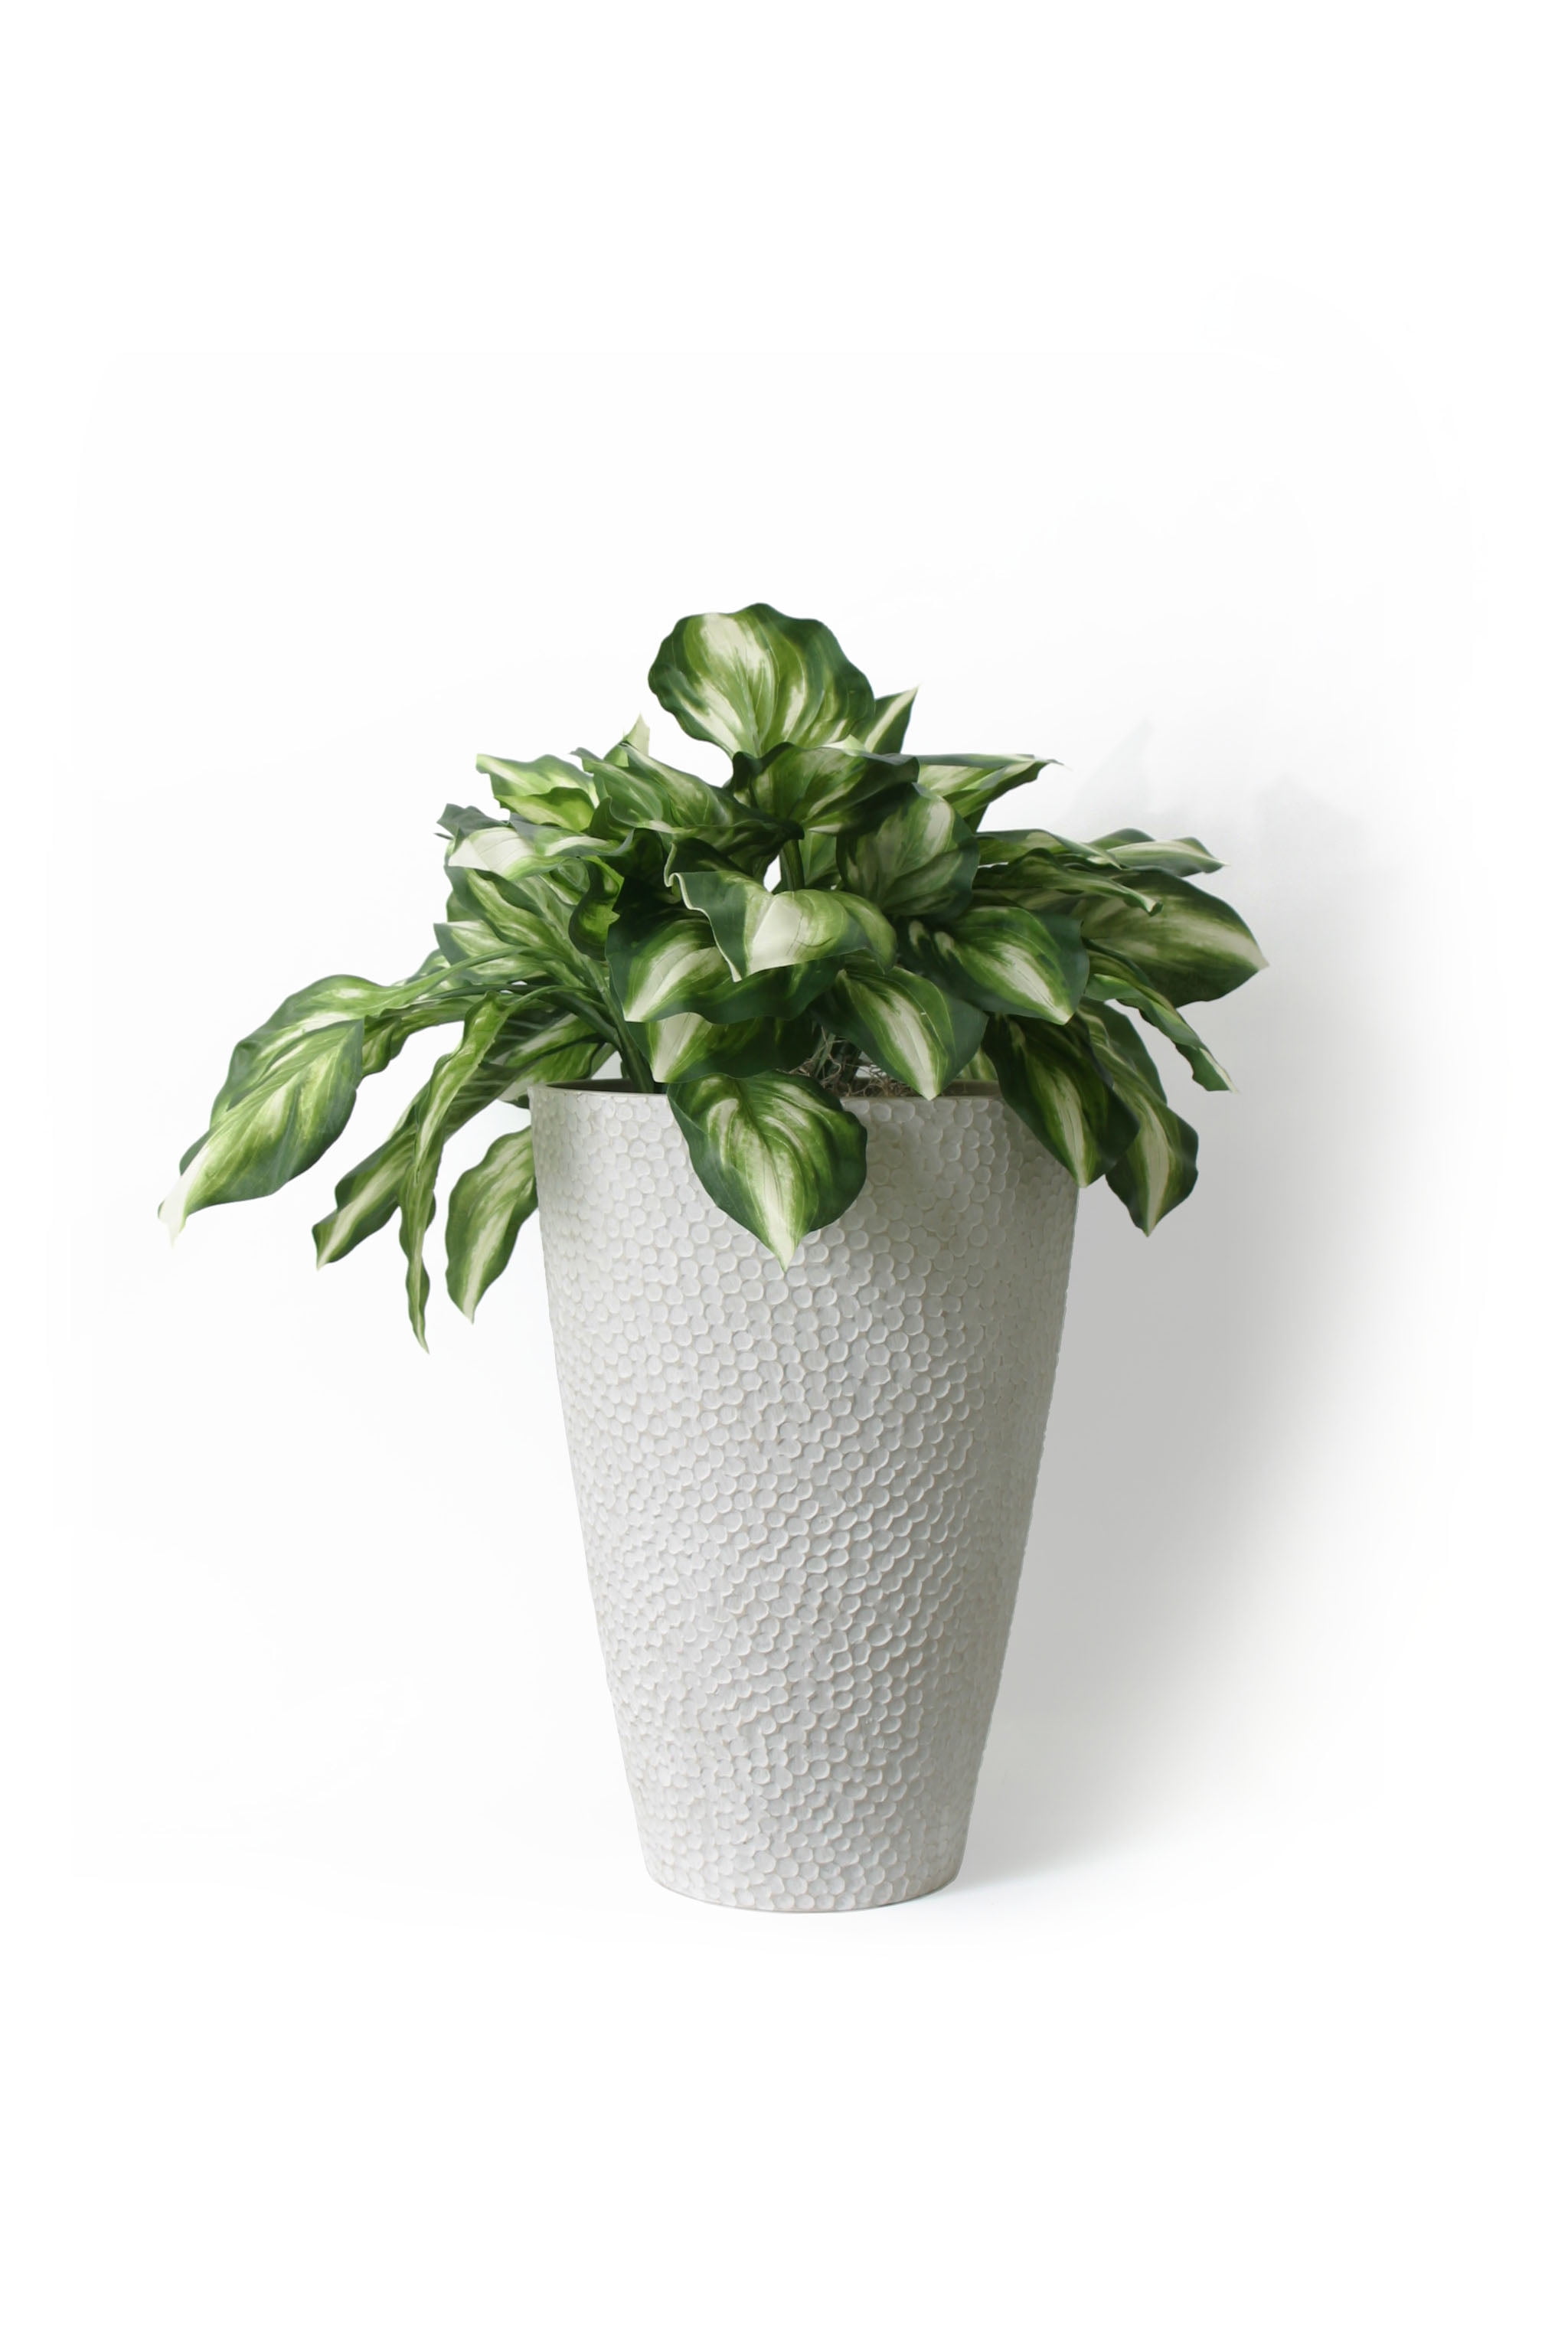 24435 20 X 14 X 14 In. Vase Planter With Hammer Texture, Weathered White